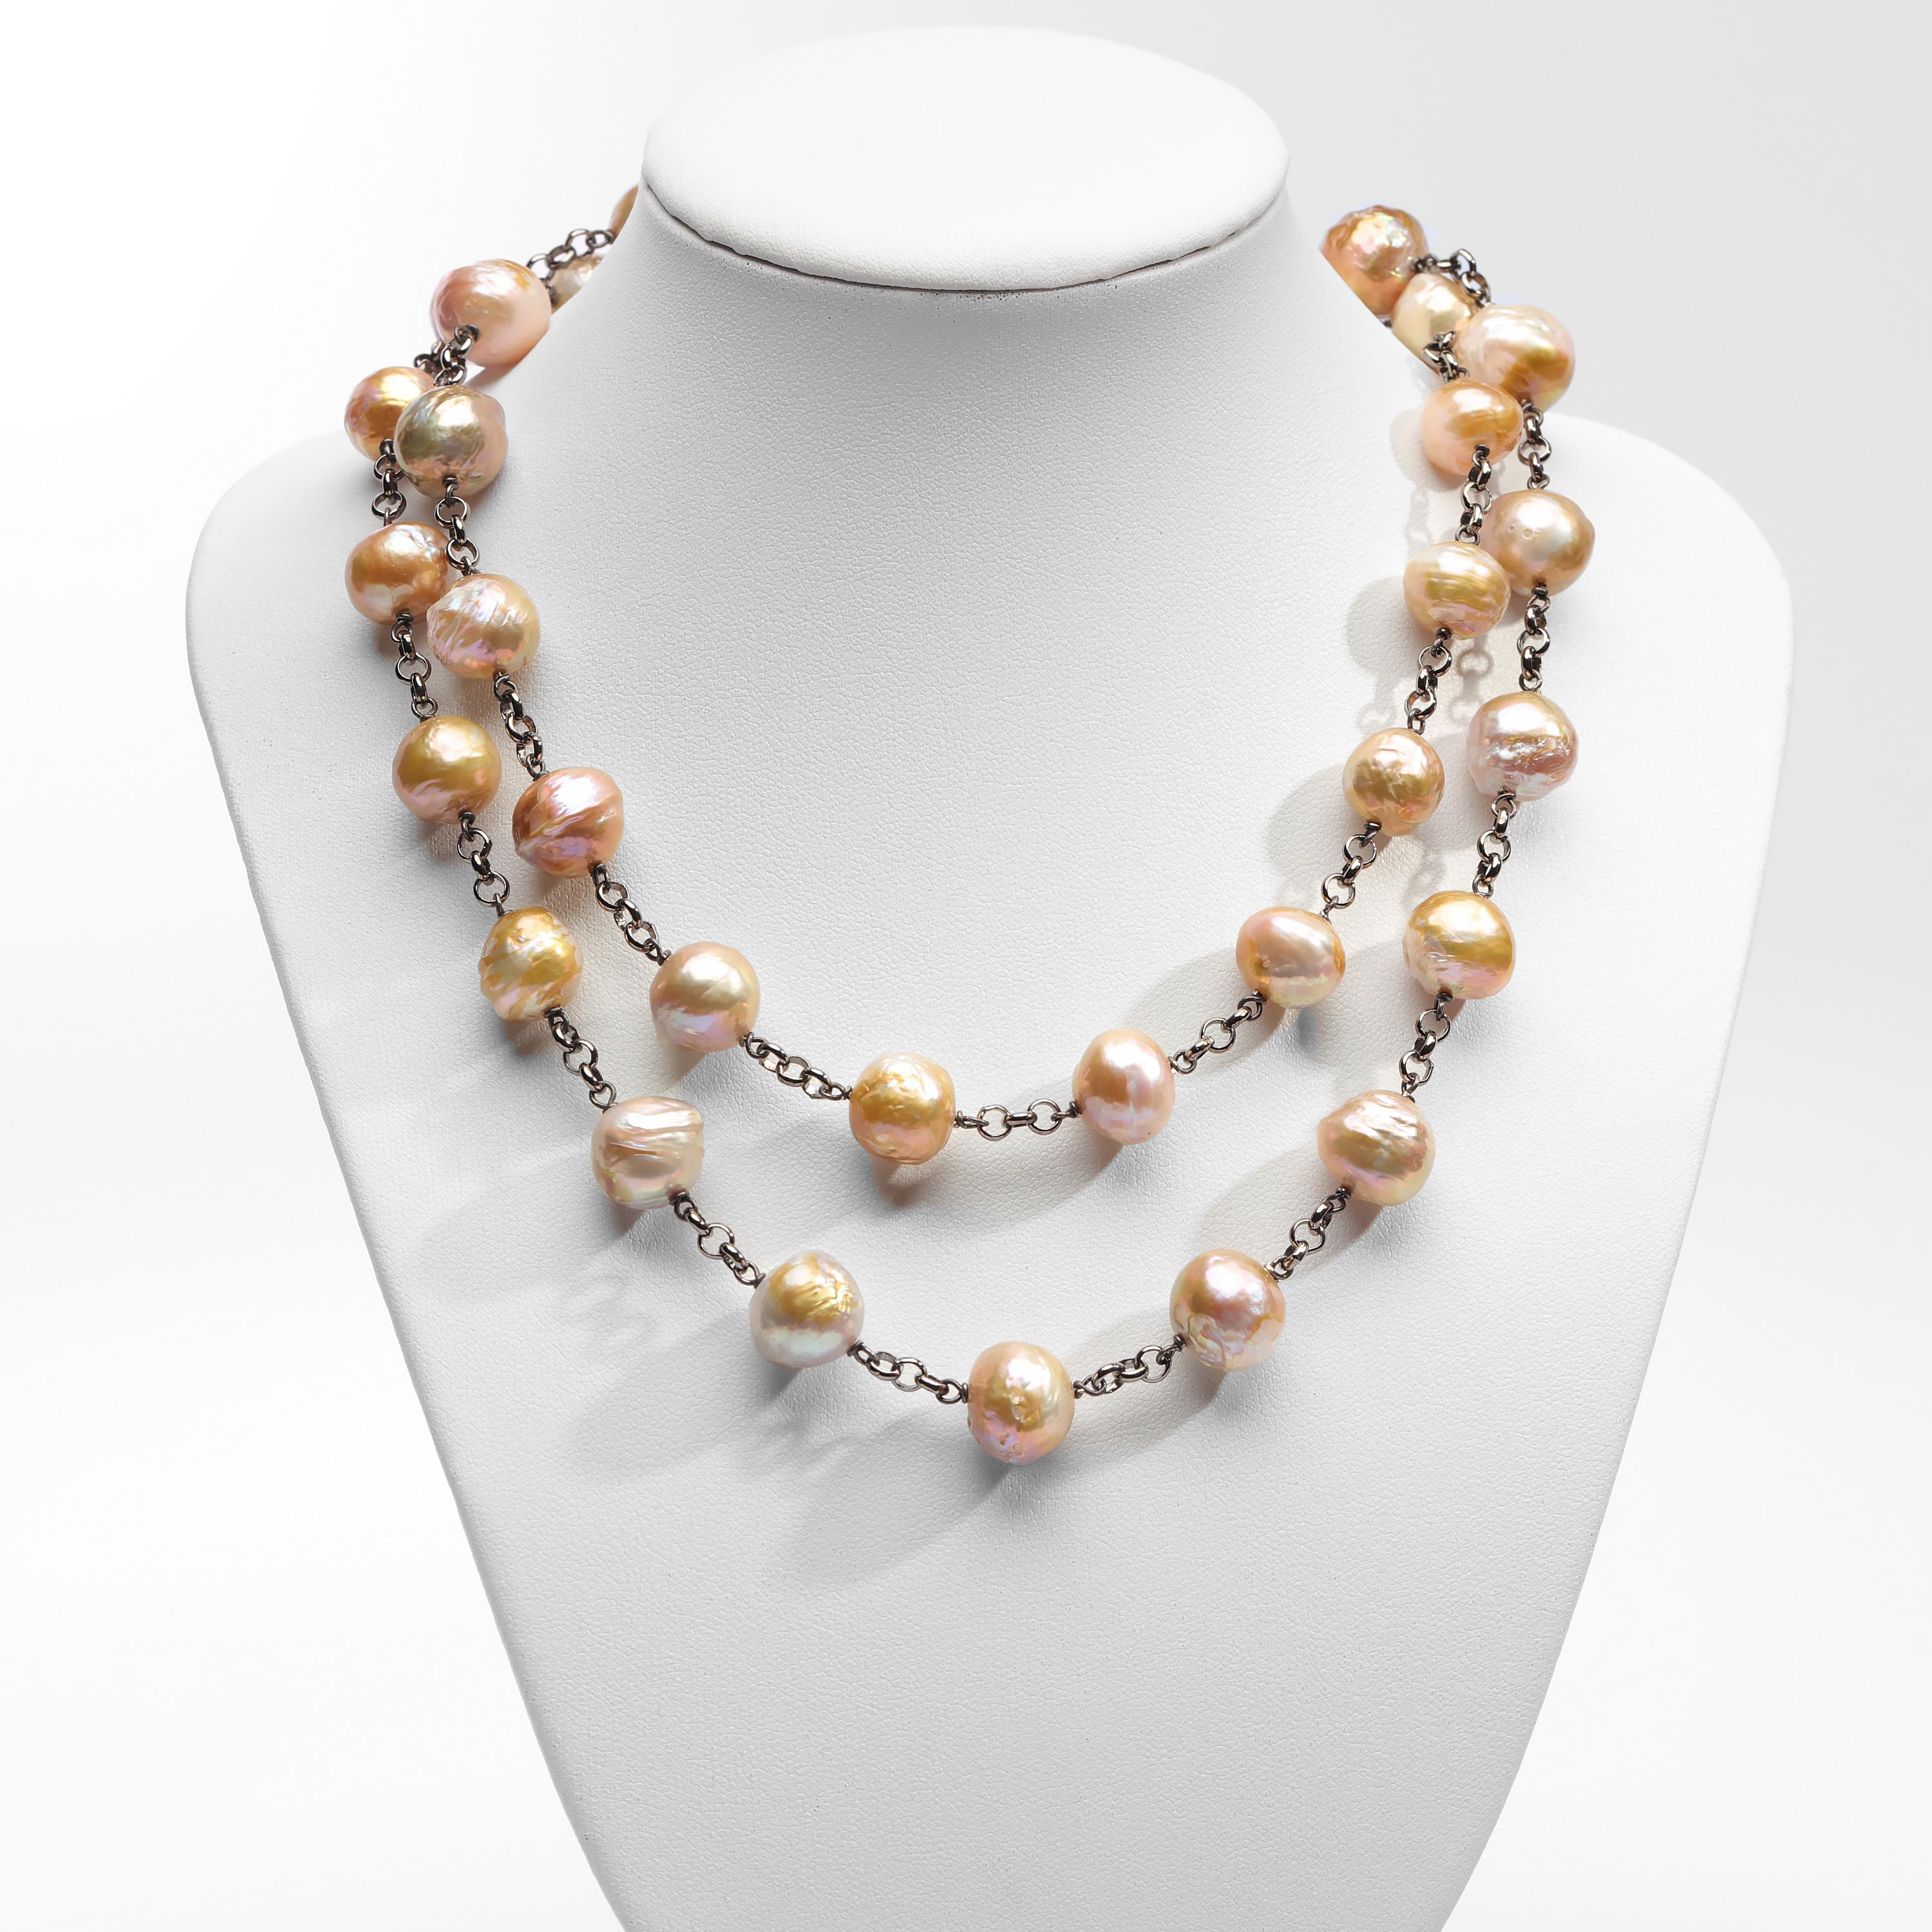 This striking, unique necklace is composed of 35 cultured Chinese freshwater pearls. These undyed, naturally-colored pearls gleam with prismatic rainbow colors as light slides over their rippled, dimpled surfaces. They have an amazing metallic